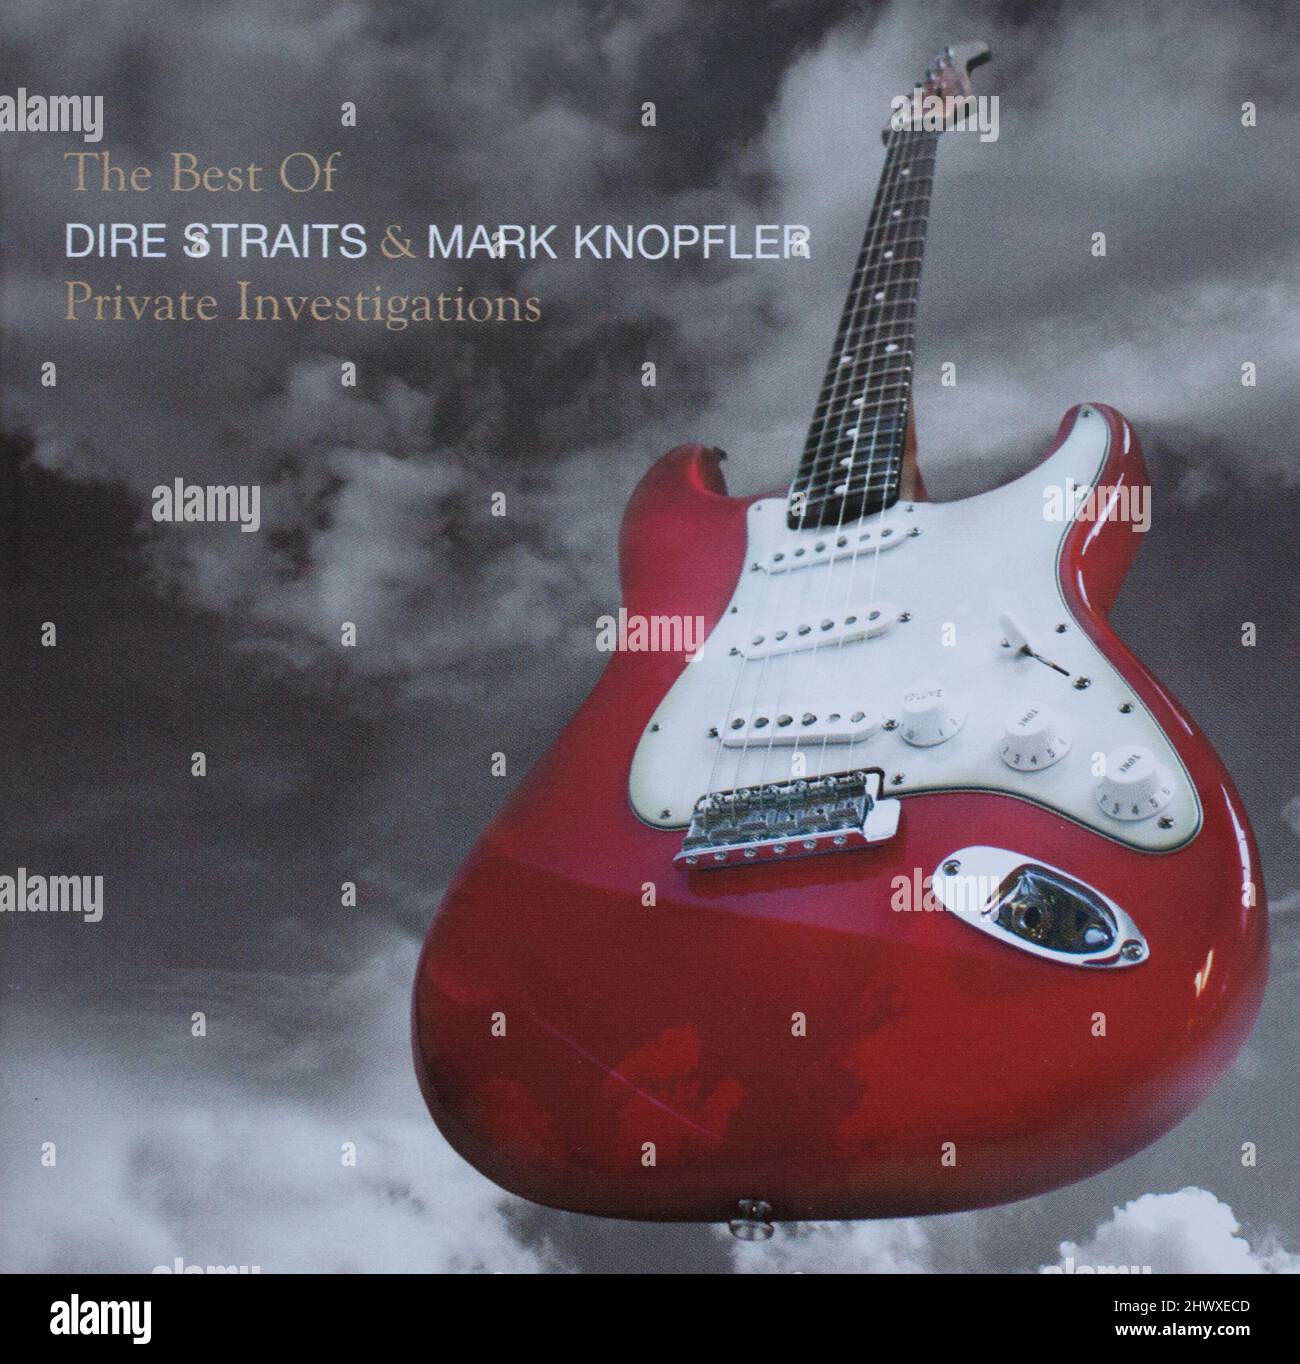 The CD album cover to The Best of Dire Straits and Mark Knopfler - Private  Investigations Stock Photo - Alamy